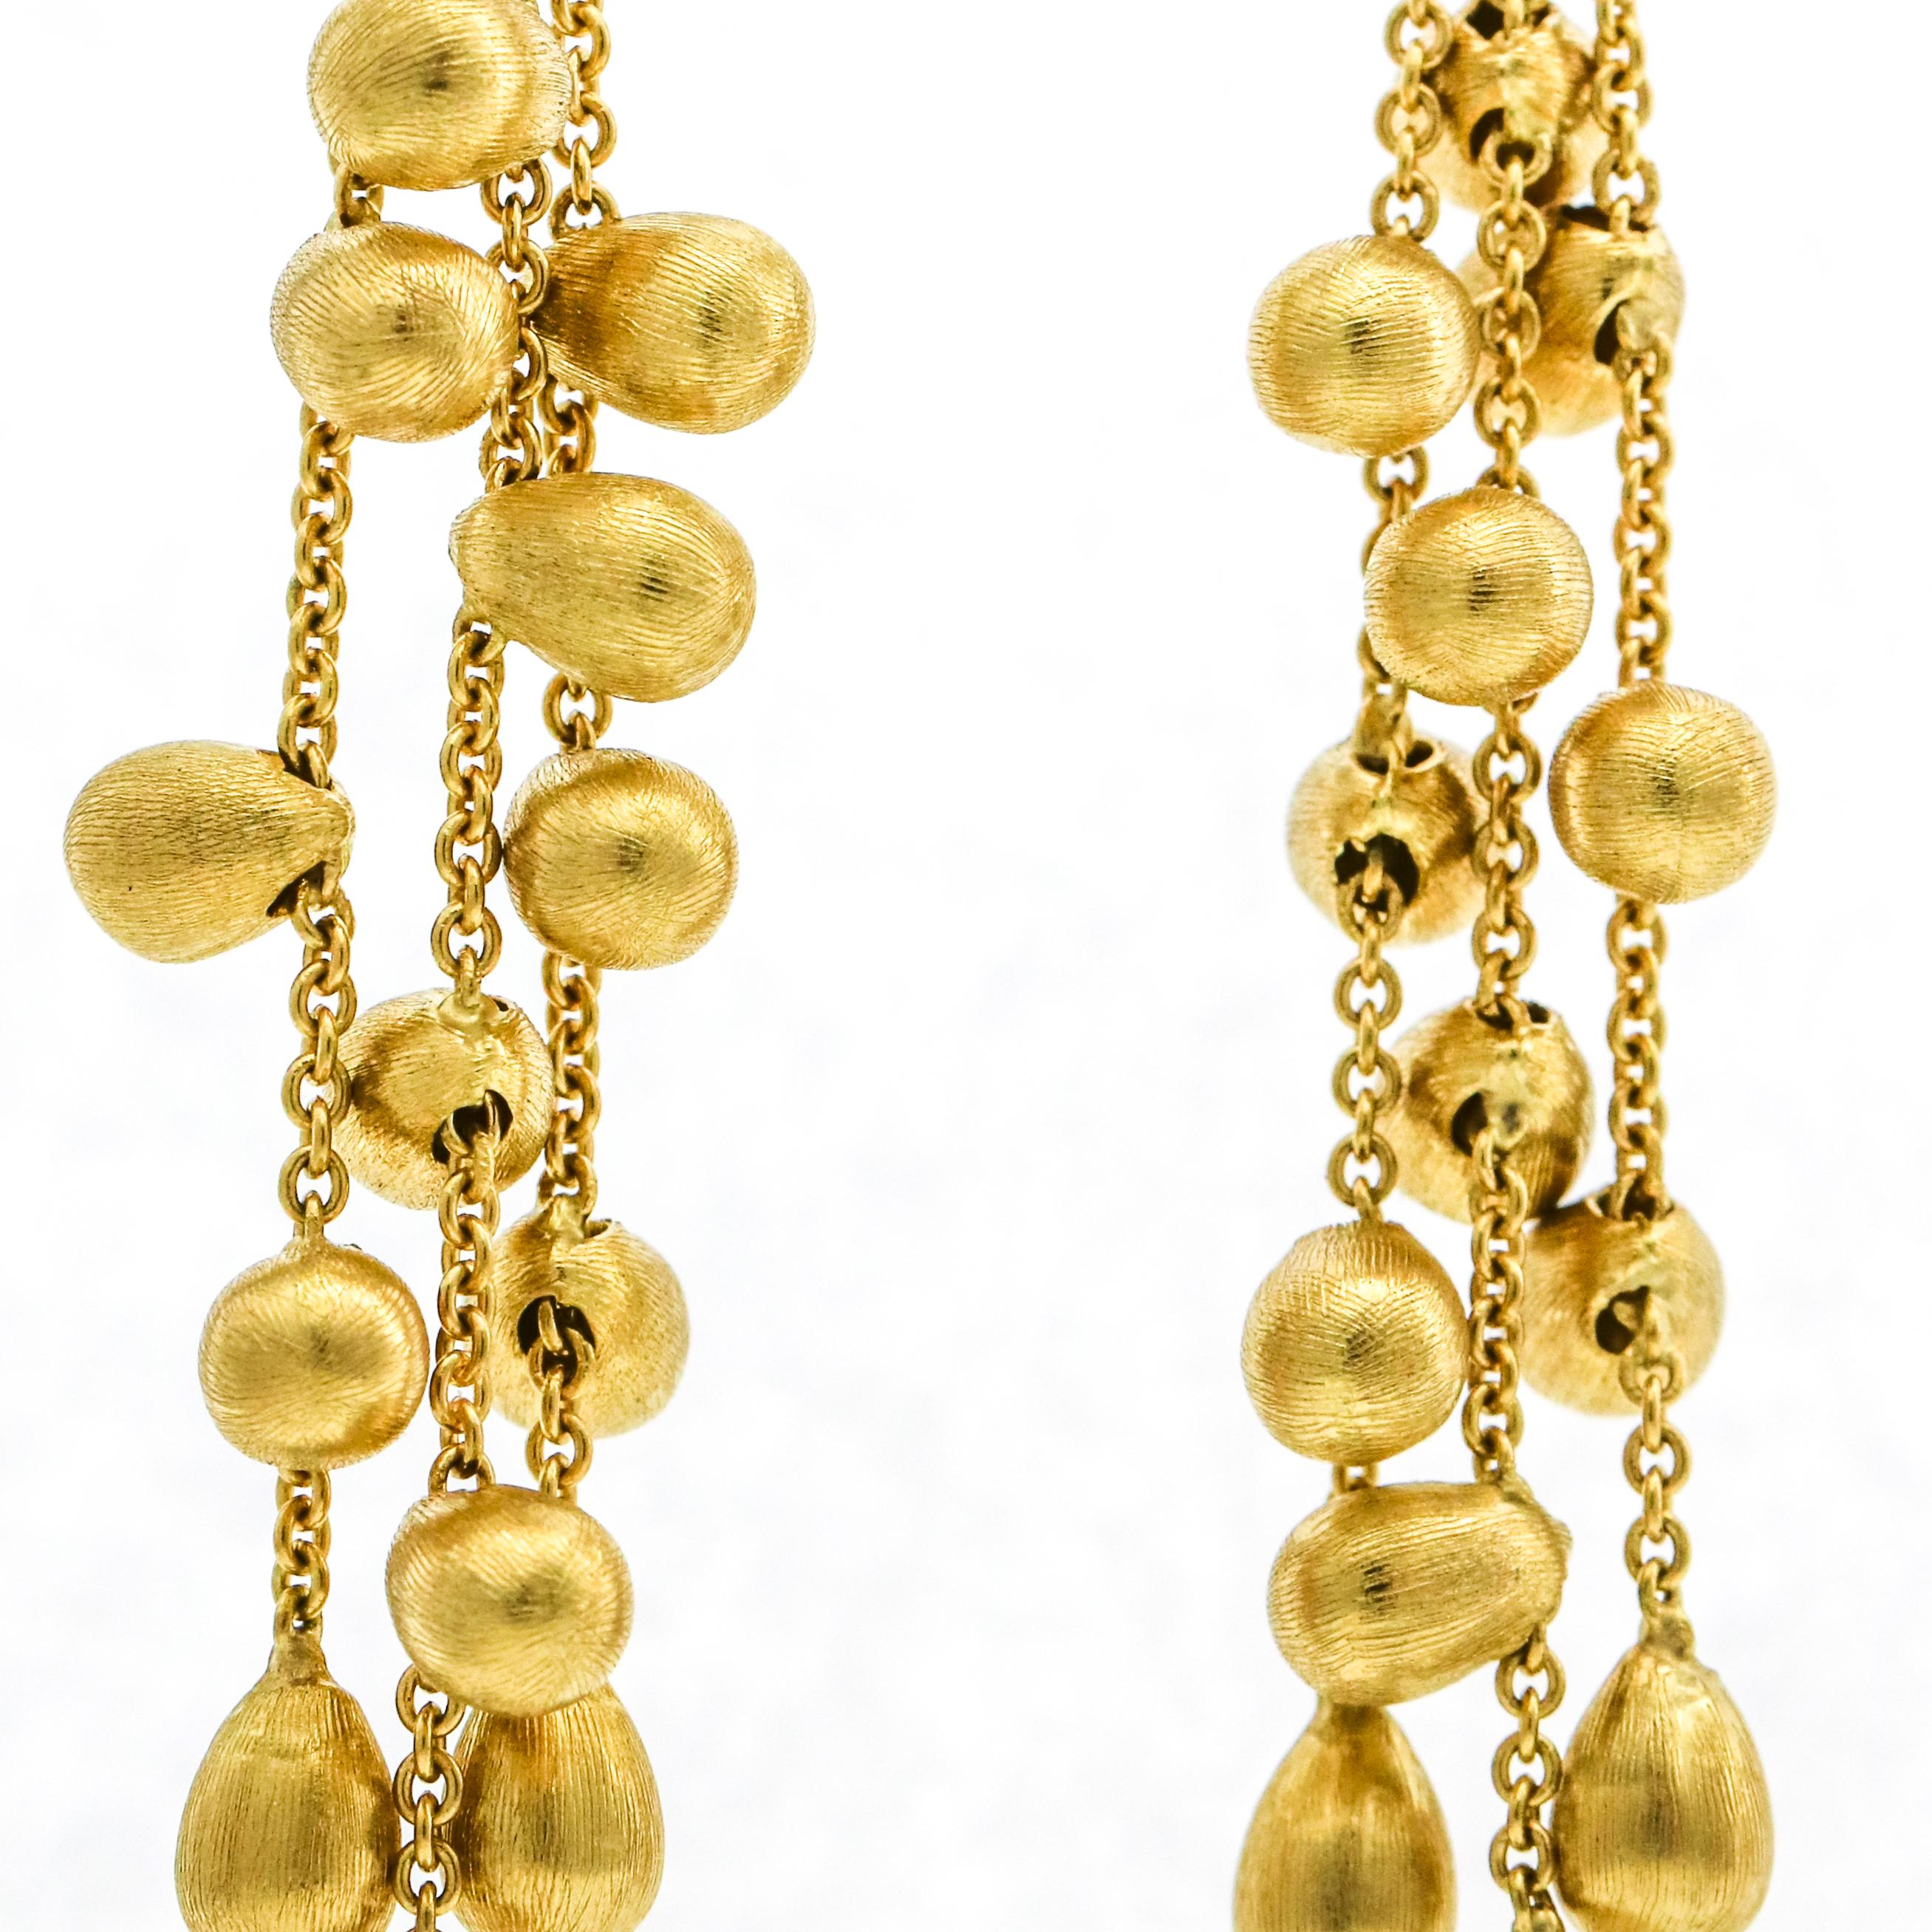 Marco Bicego 1 Karat Yellow Gold Siviglia 3-Strand Drop Earrings In Excellent Condition For Sale In Fort Lauderdale, FL